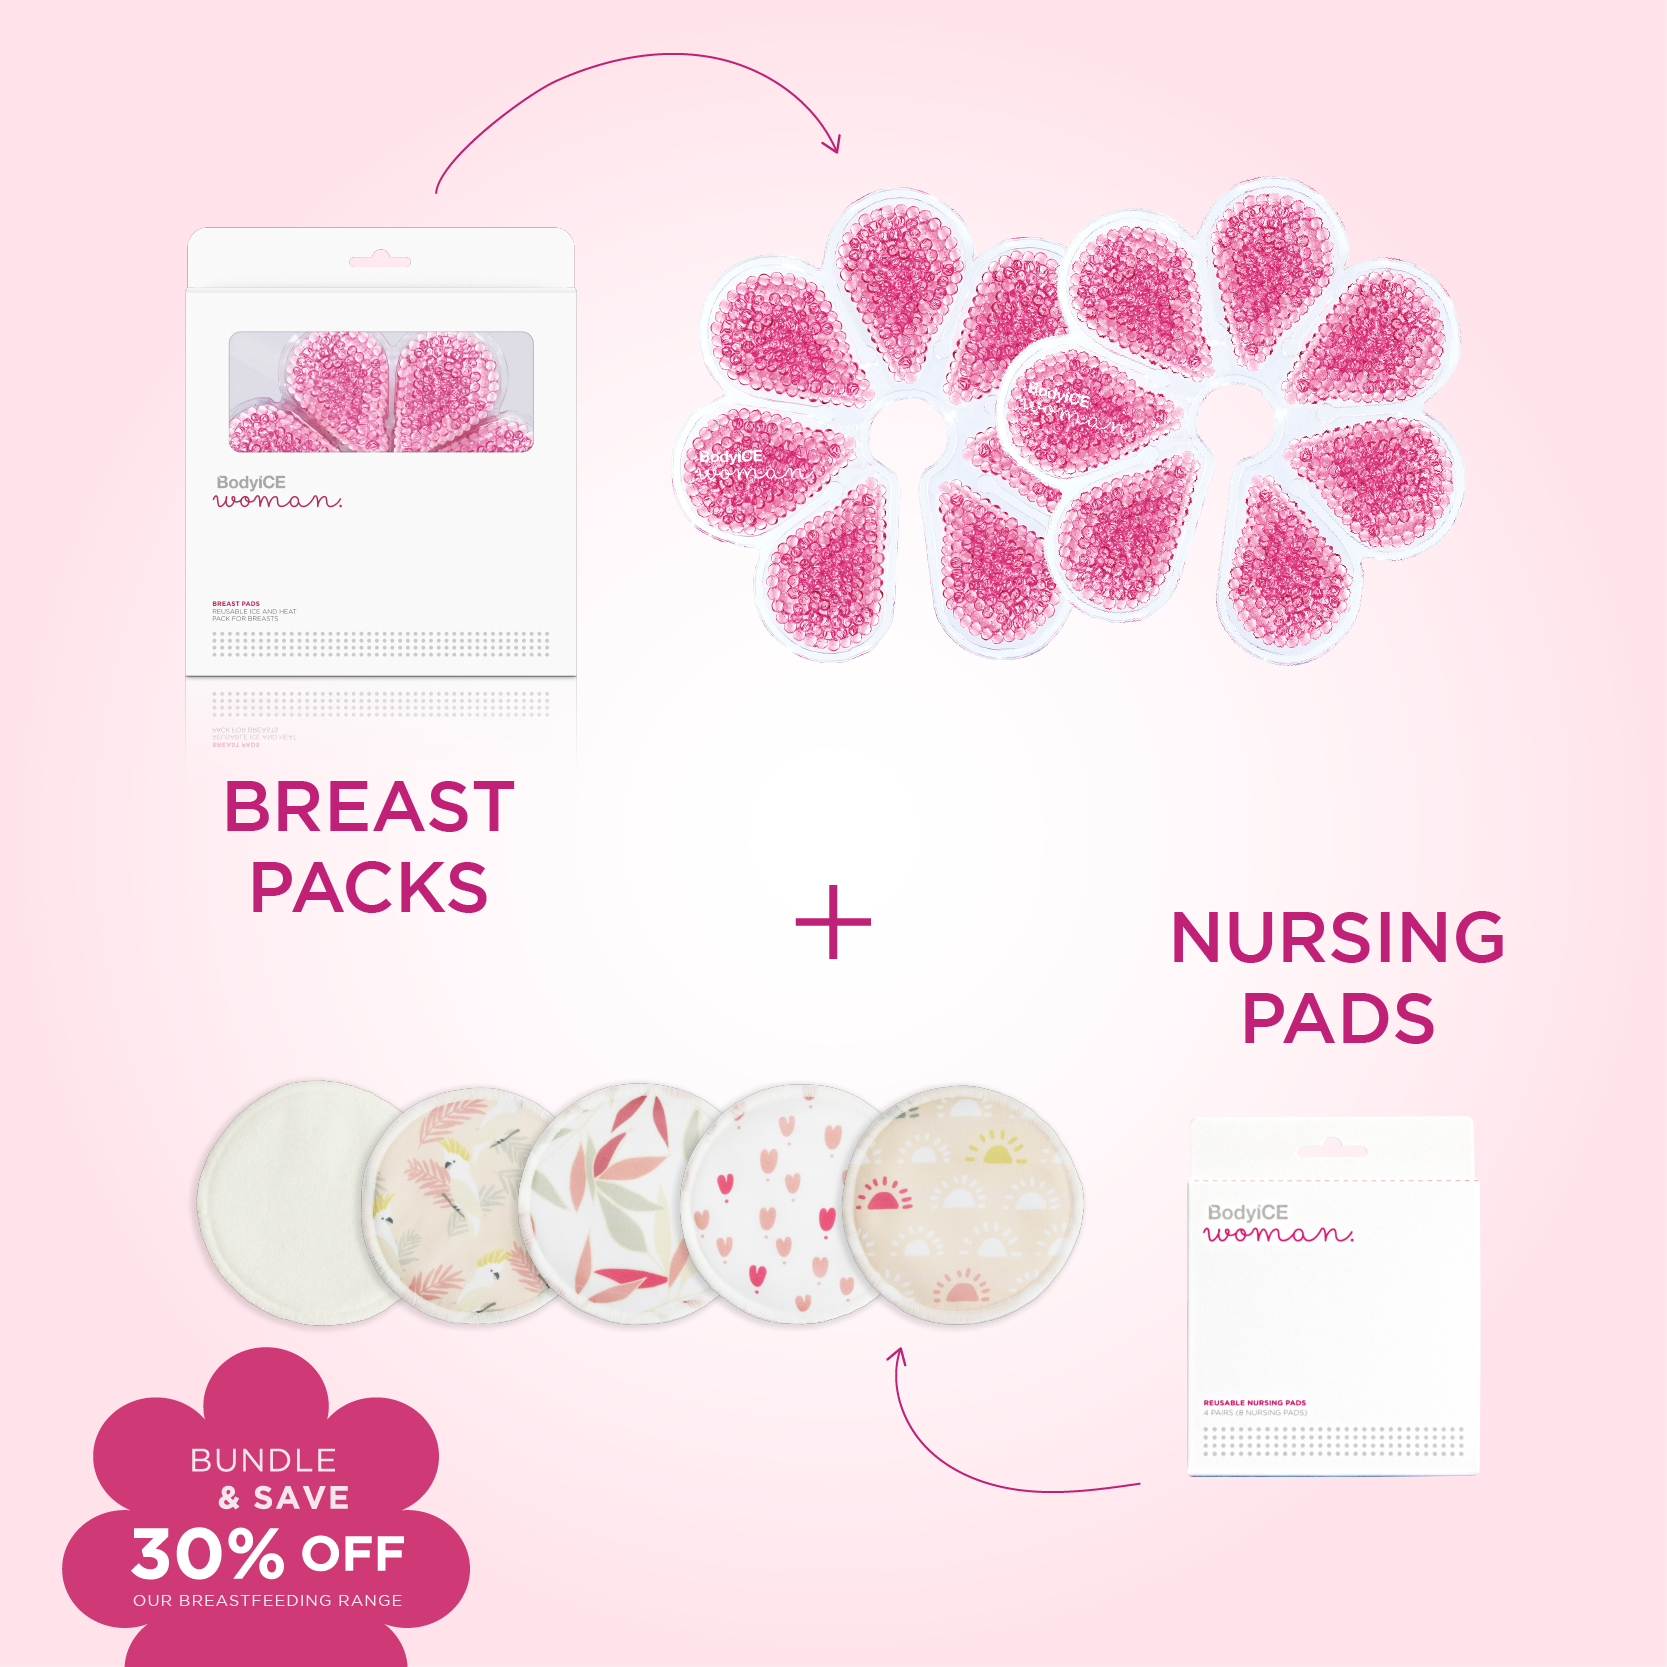 Reusable Heat Pack Microwavable Breast Ice Pack - China Breast Ice Pack and  Gel Breast Pad price